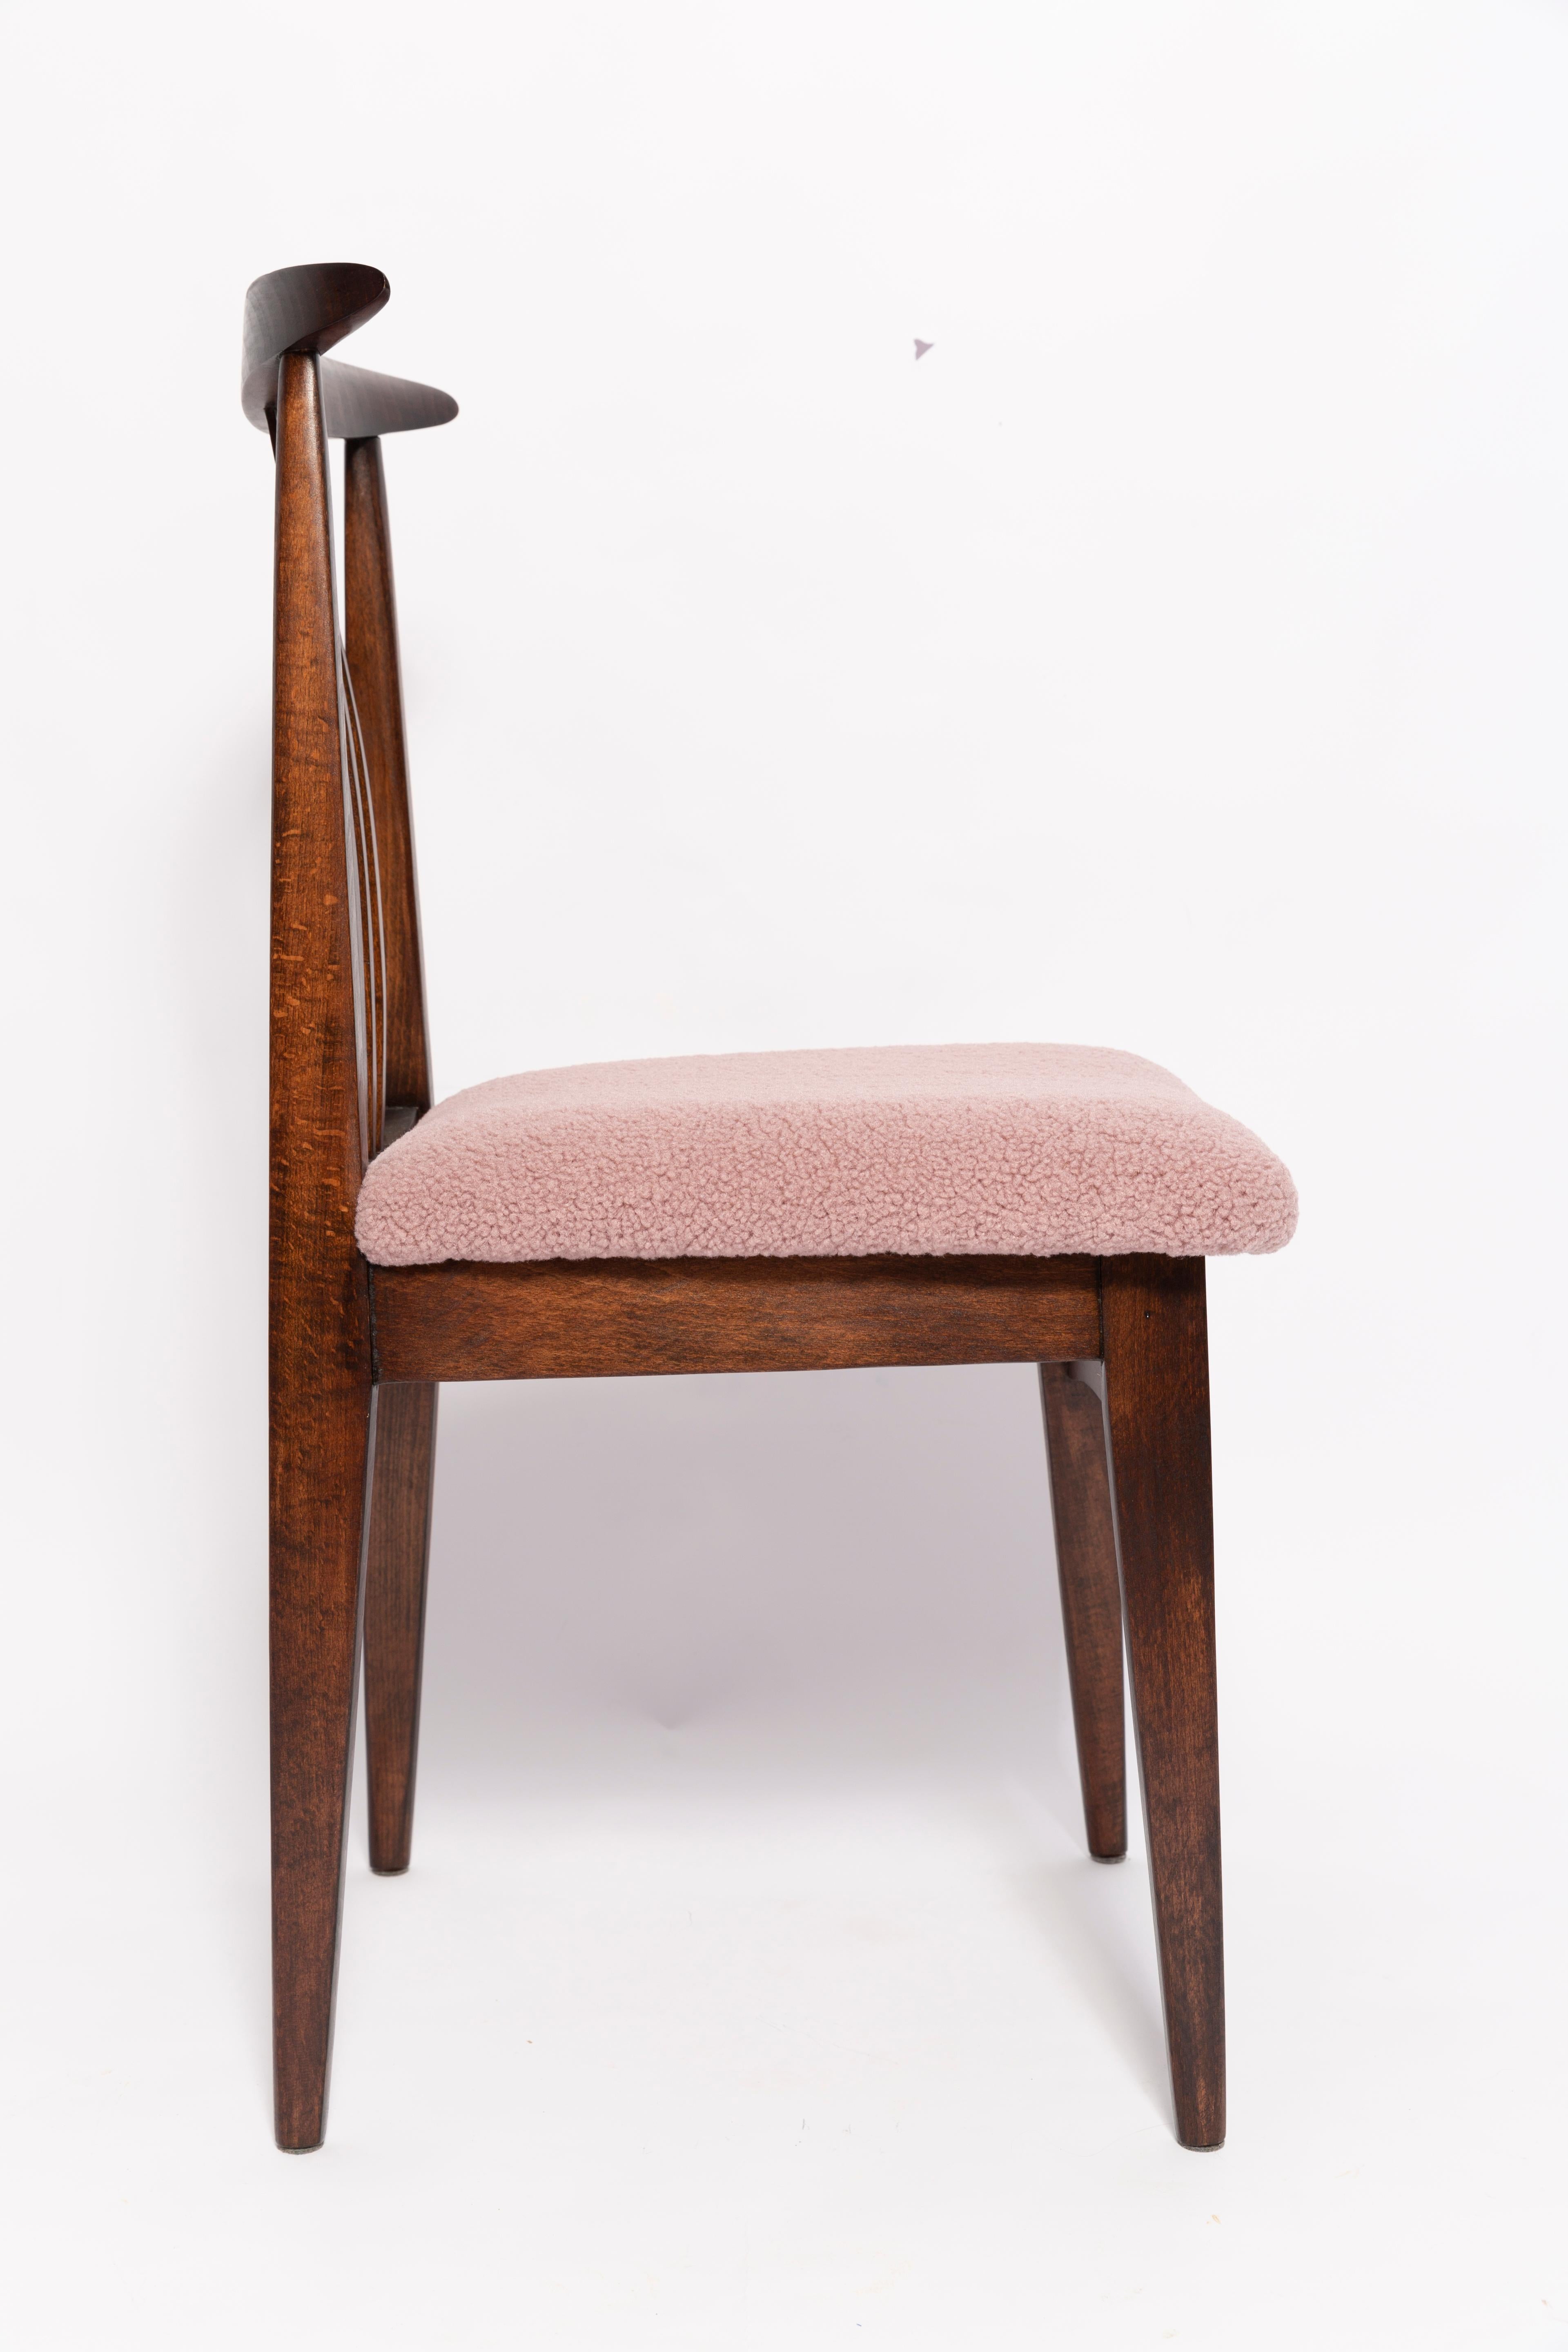 Hand-Crafted Mid-Century Pink Blush Boucle Chair, Walnut Wood, by M. Zielinski, Europe, 1960s For Sale